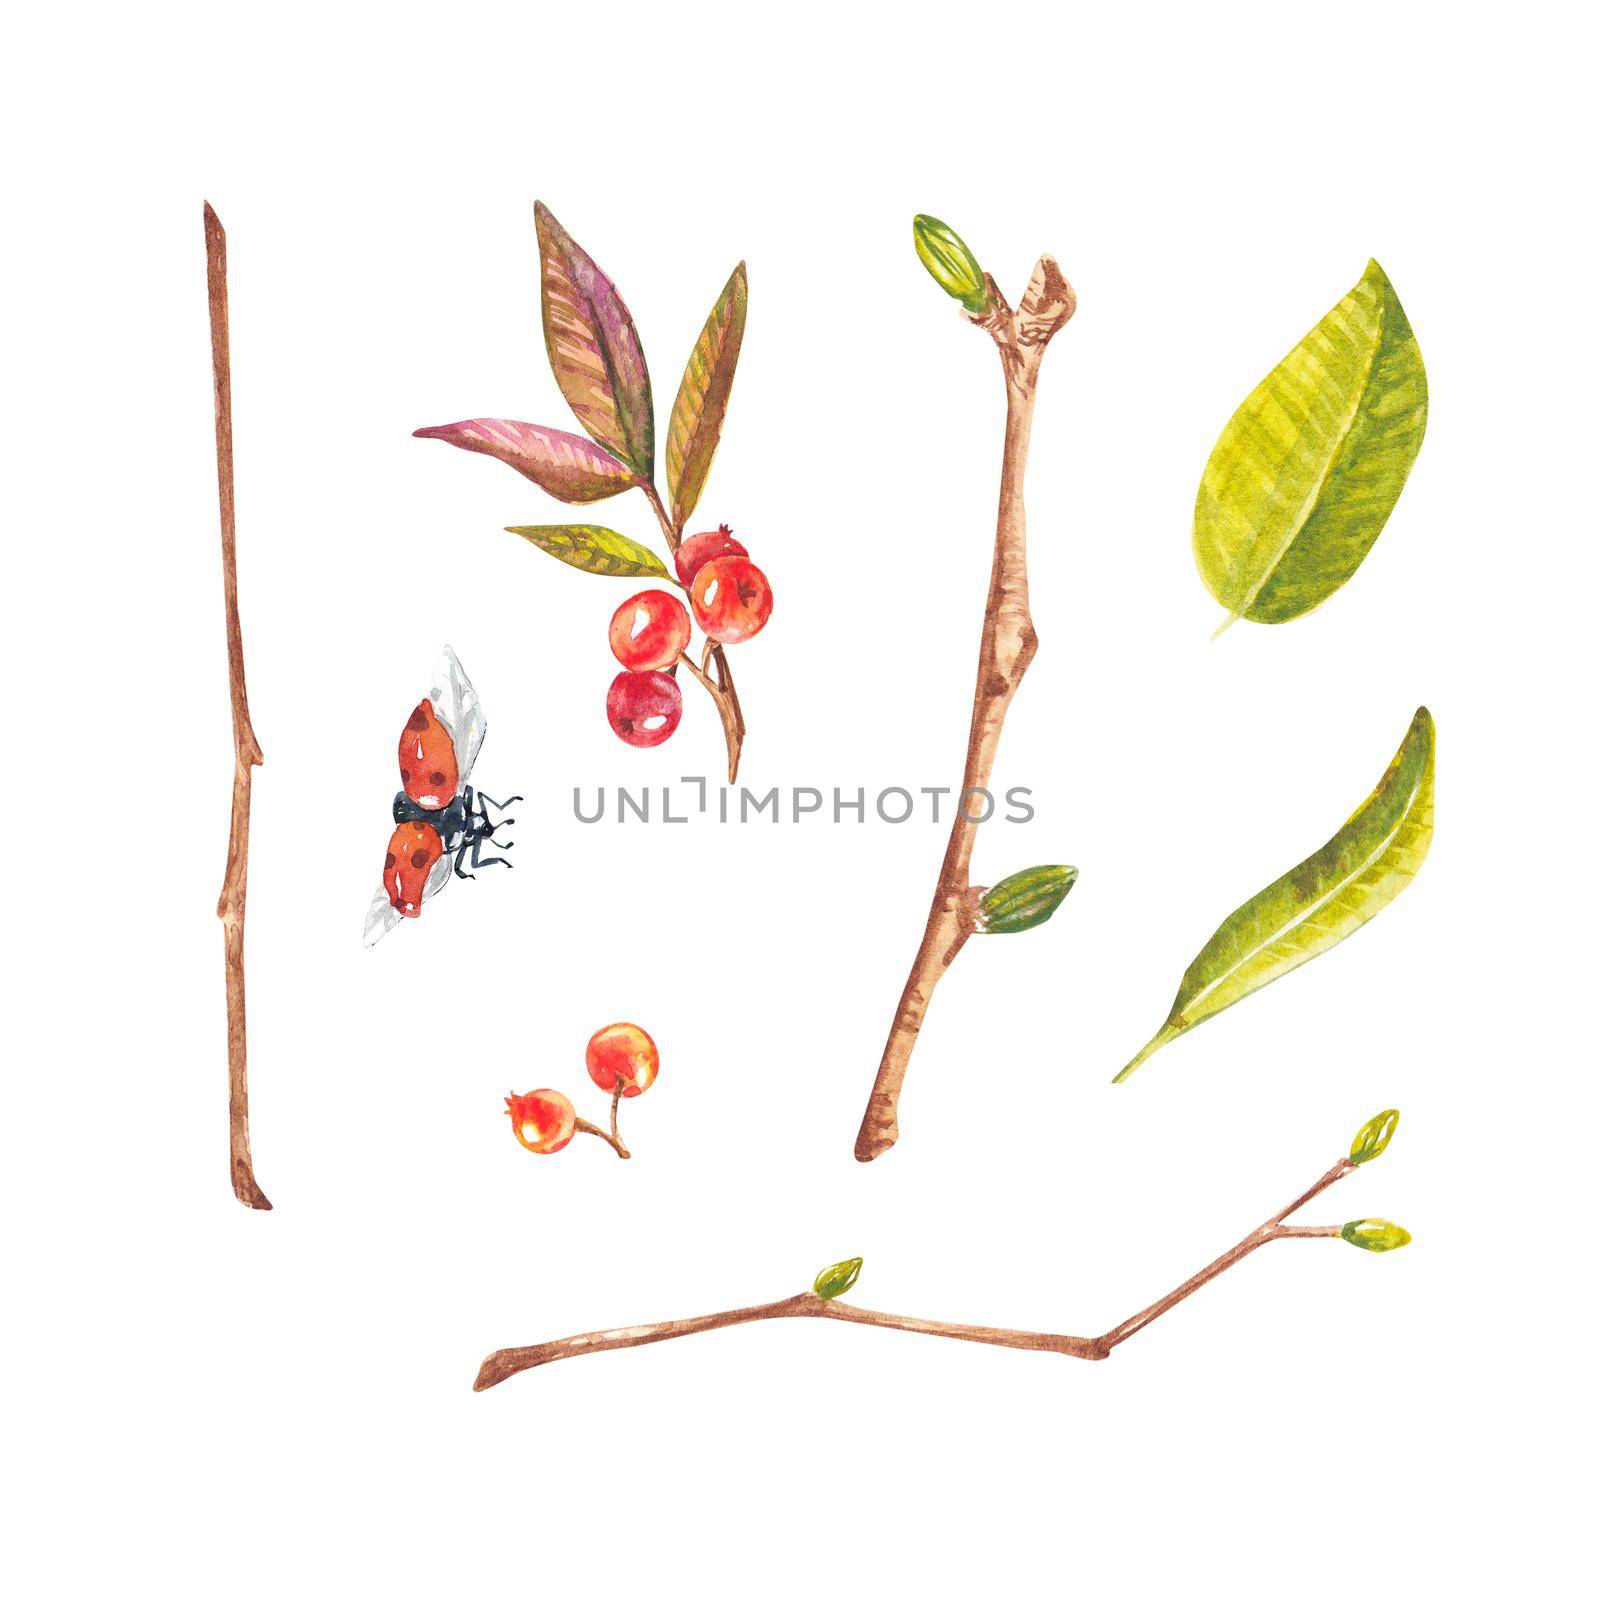 Ladybug and a branch with berries and leaves. Watercolor illustration on a white background. Suitable for design, postcards, wedding invitations, packages, business cards, mugs, printed products by NastyaChe